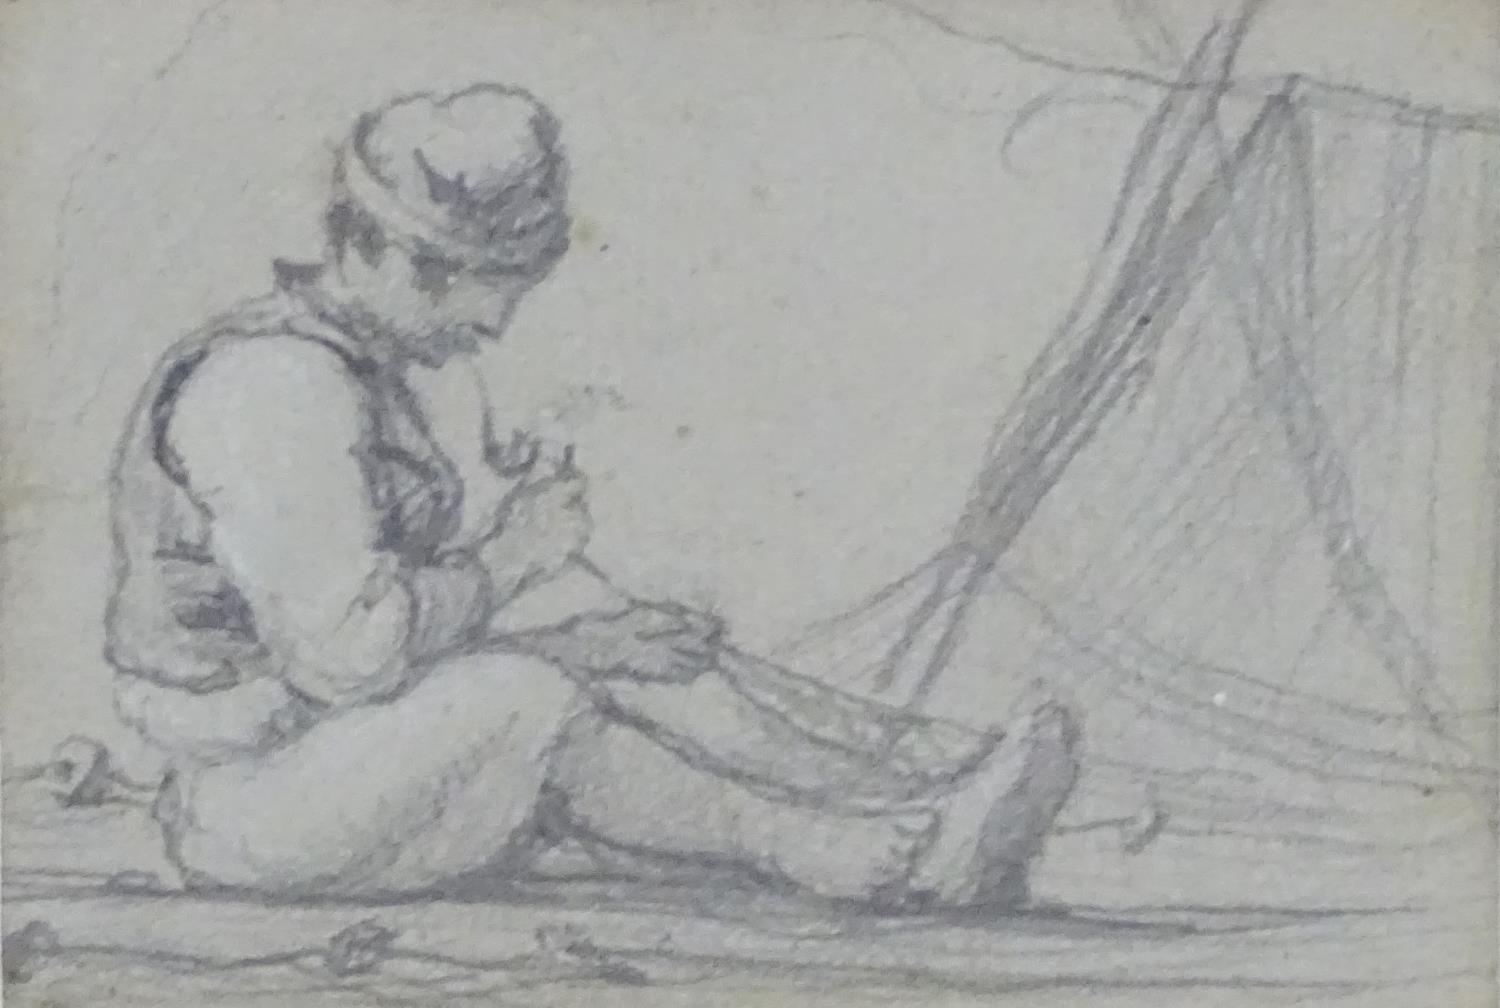 XIX-XX, Pencil on paper, A sketch of a seated man smoking a pipe whilst mending fishing nets.